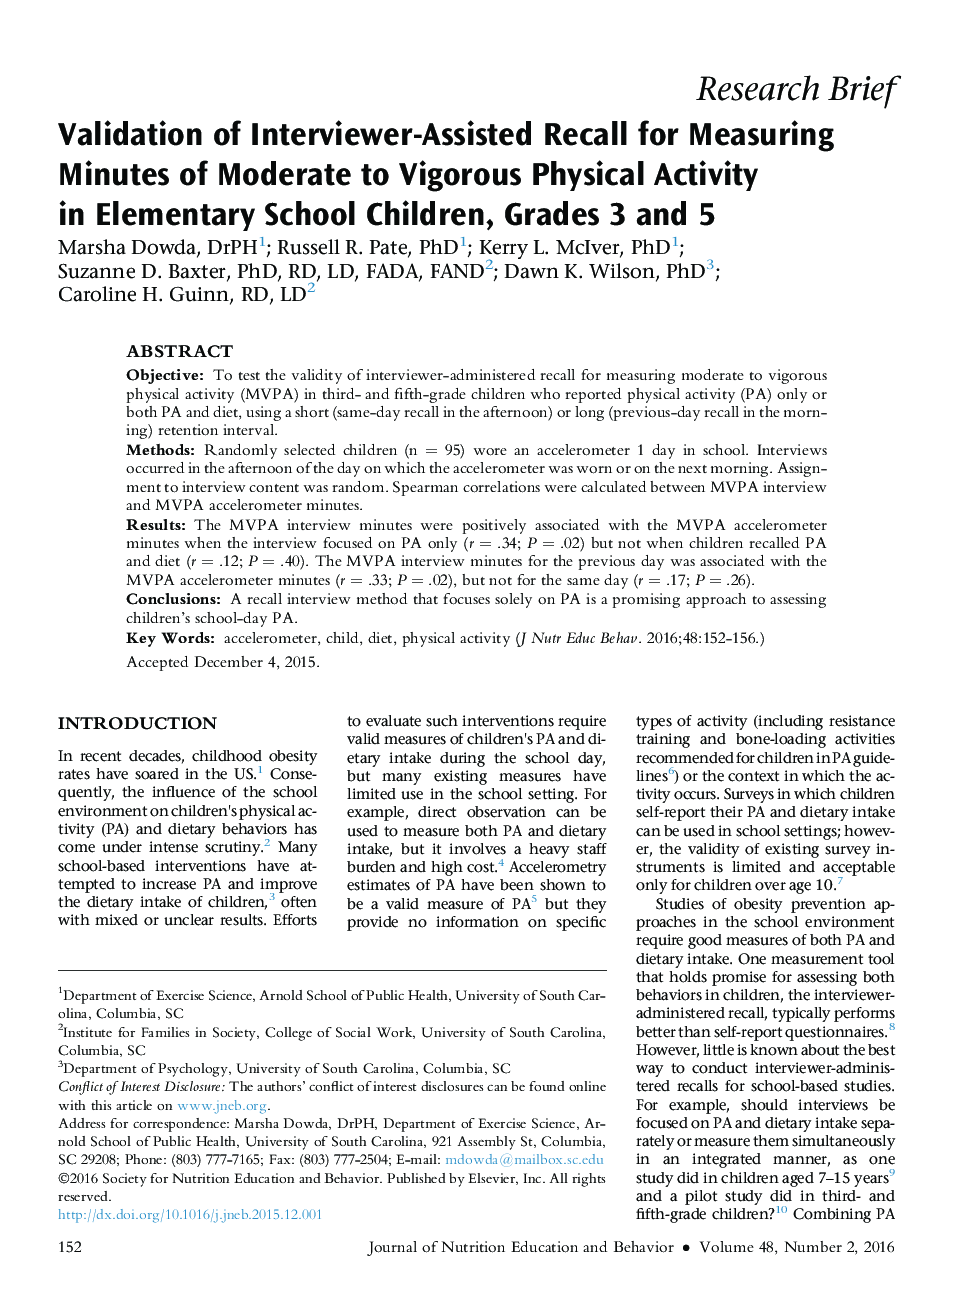 Validation of Interviewer-Assisted Recall for Measuring Minutes of Moderate to Vigorous Physical Activity inÂ Elementary School Children, Grades 3 and 5